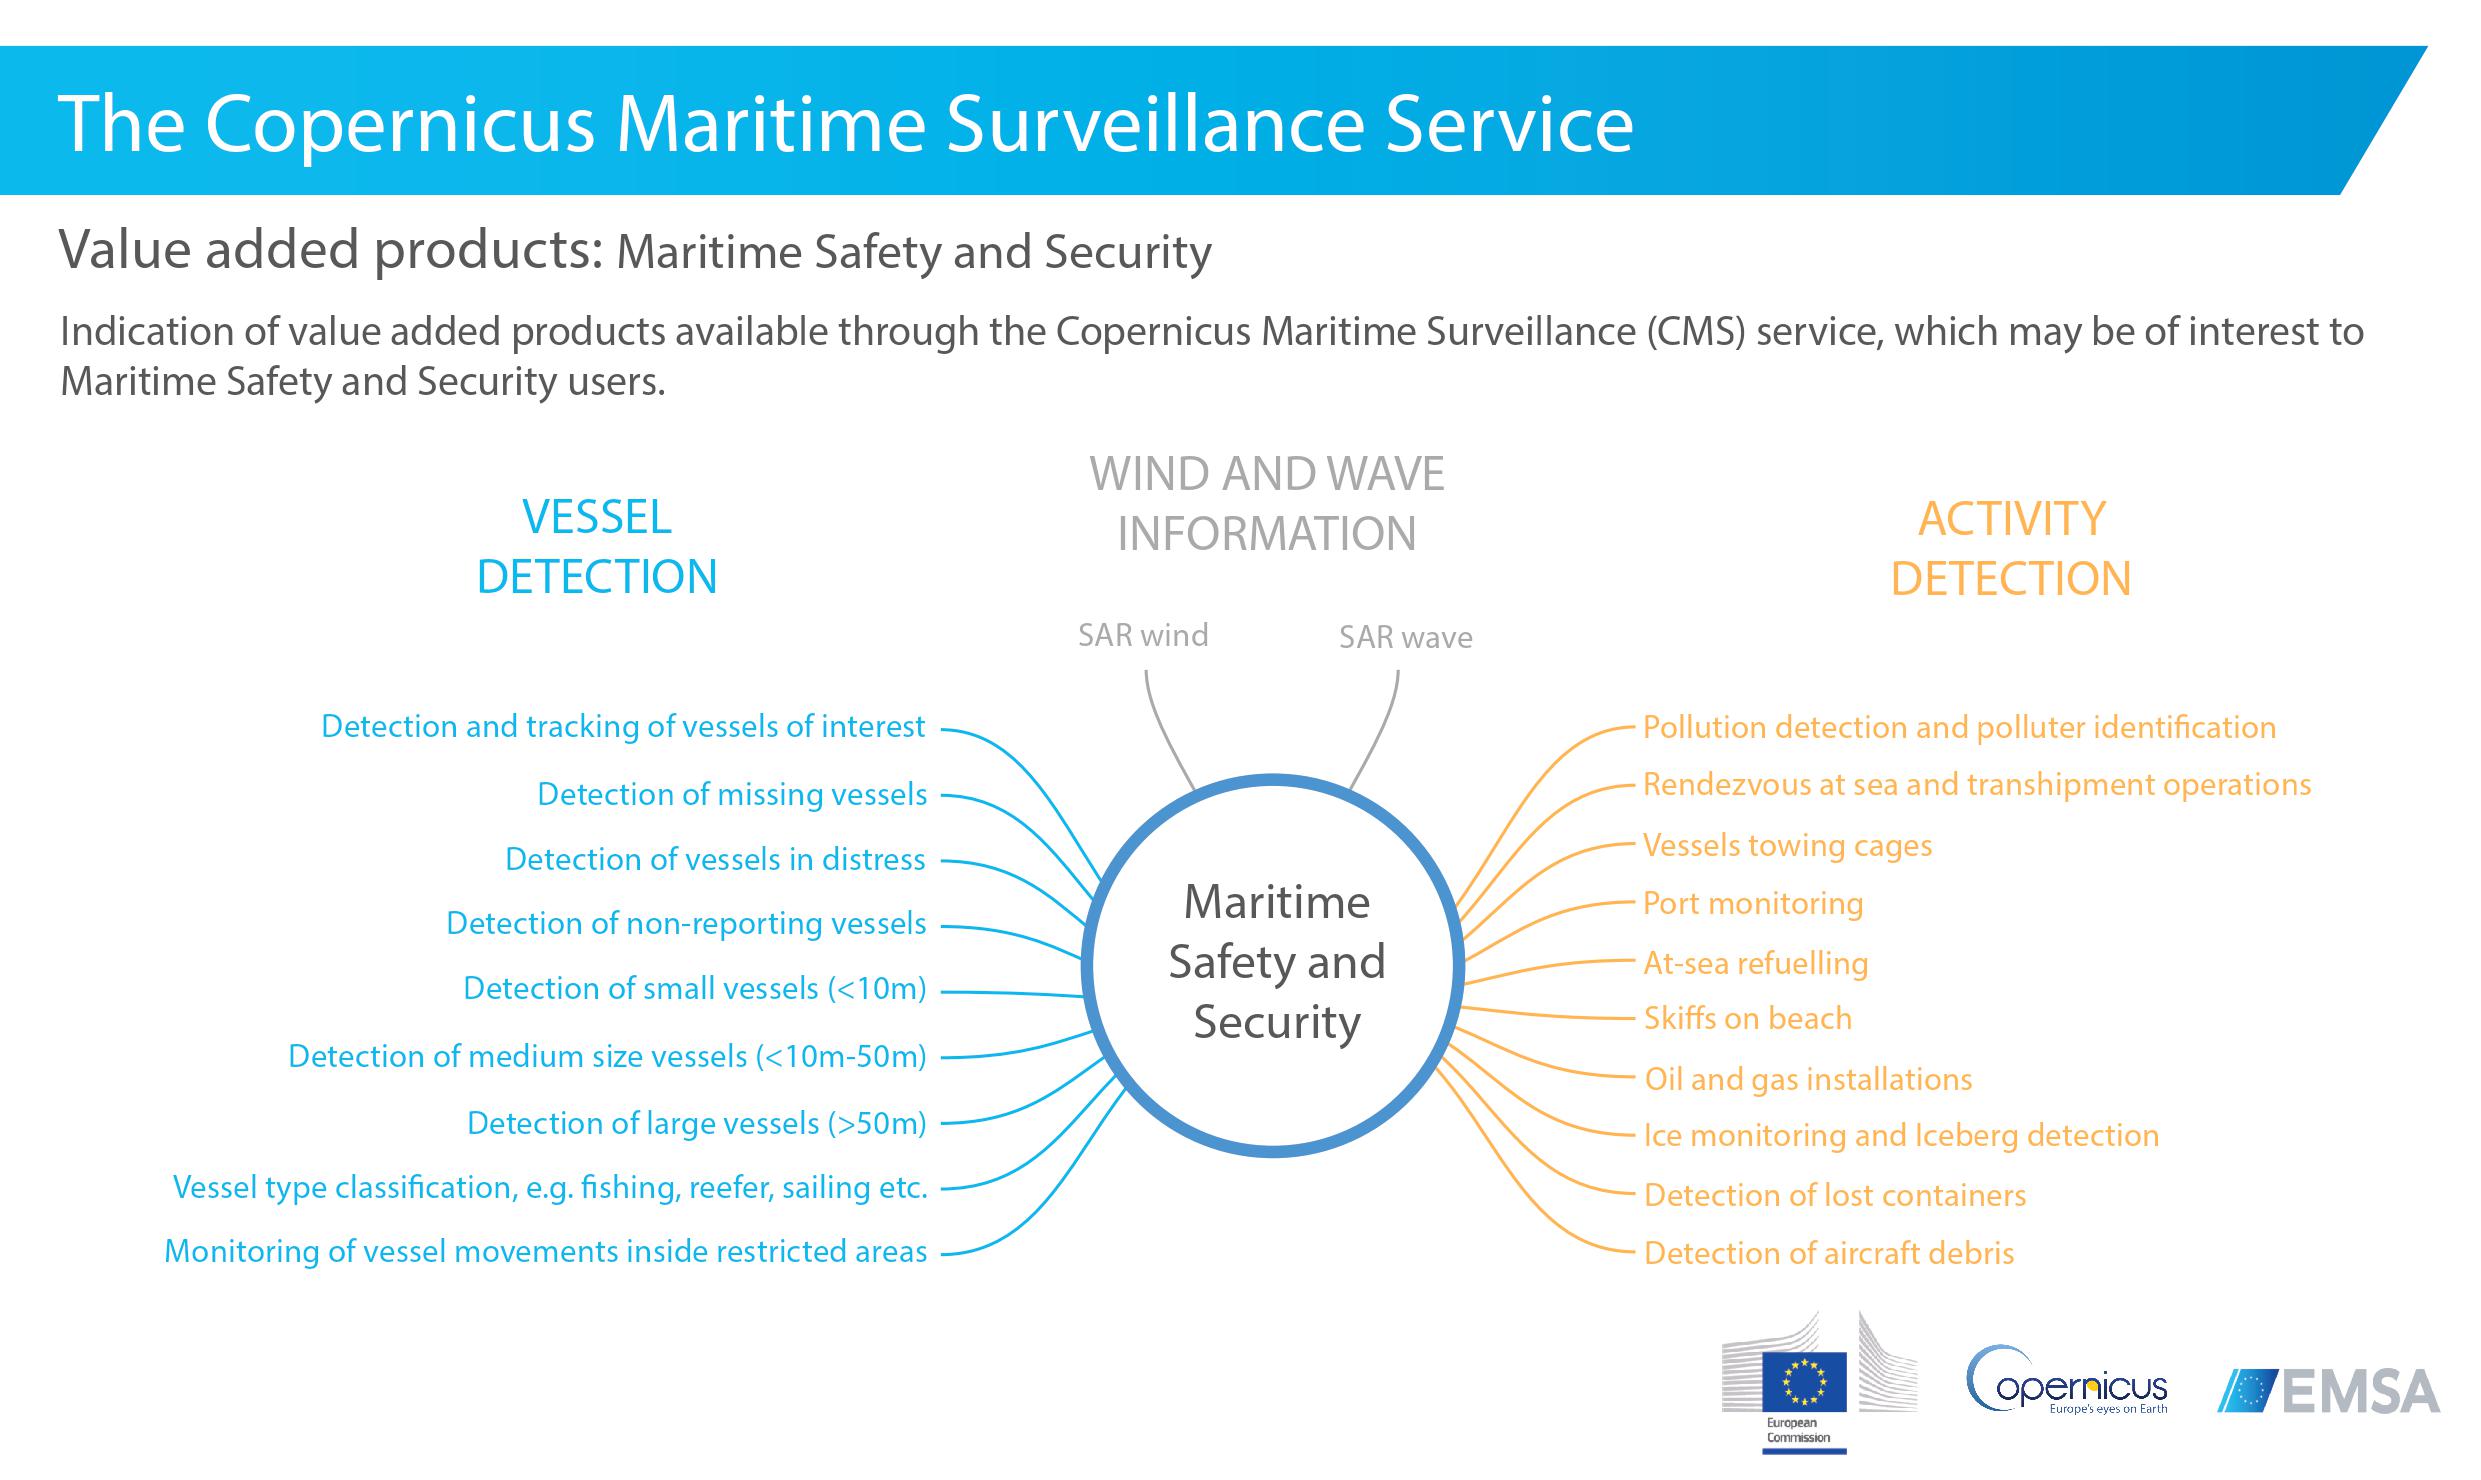 CMS VAP Maritime Safety and Security Image 1